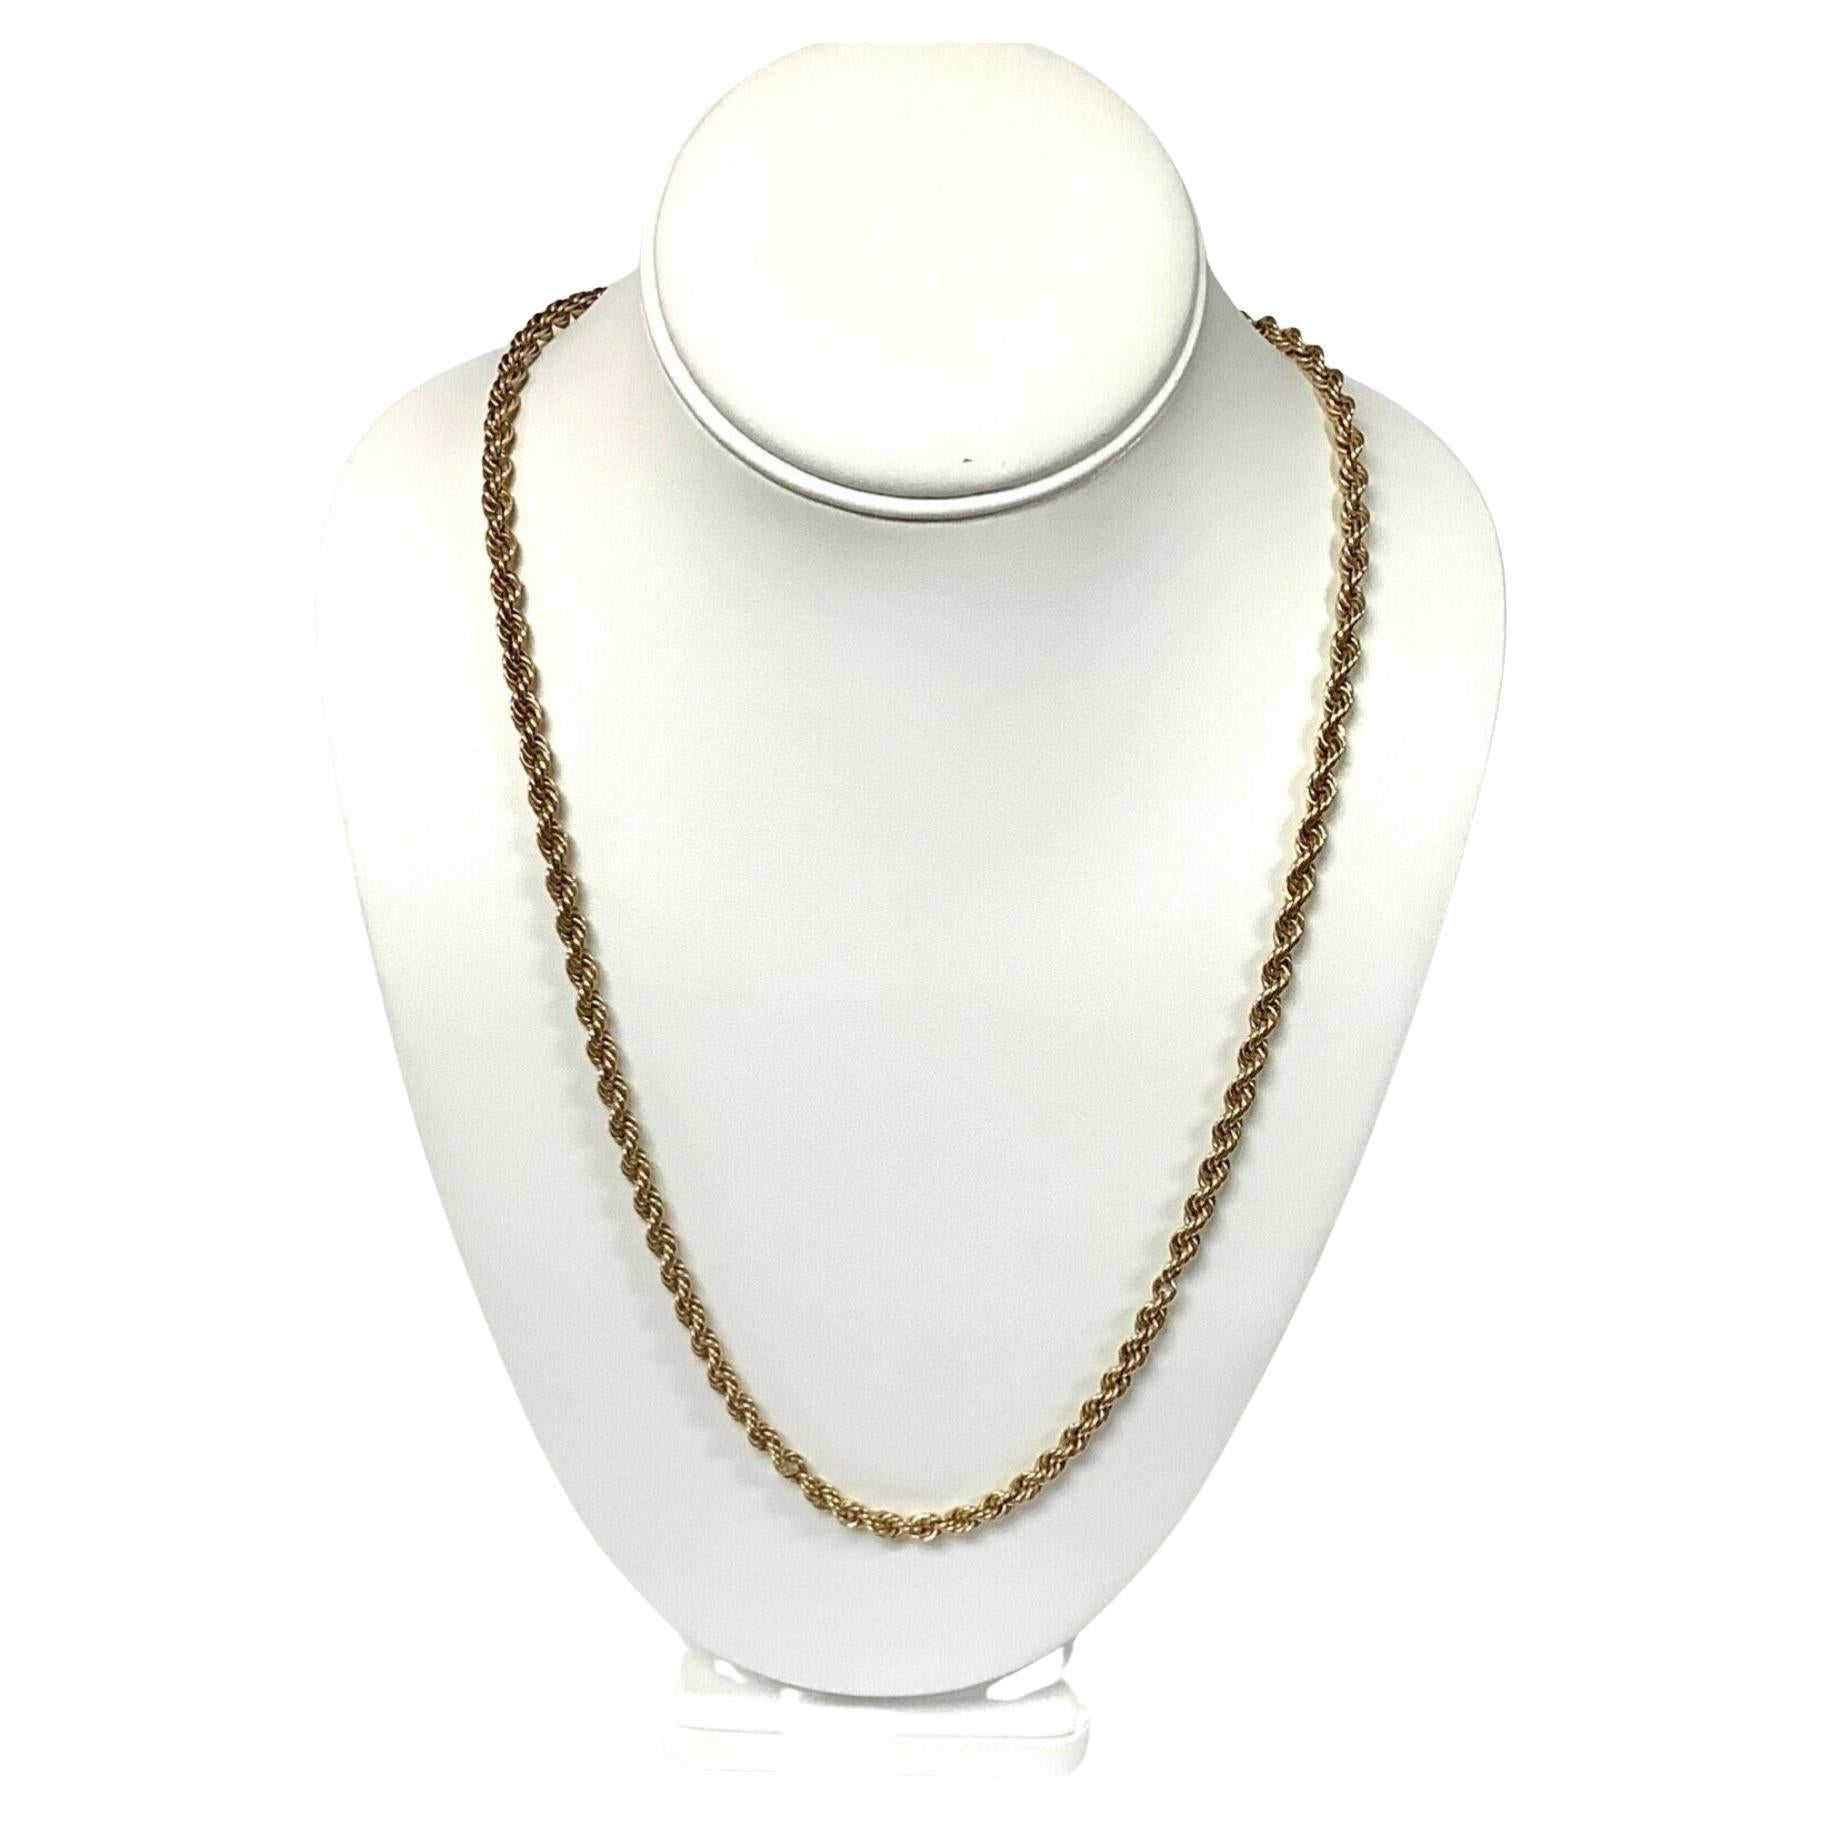 14k Yellow Gold Twisted Rope Chain Necklace